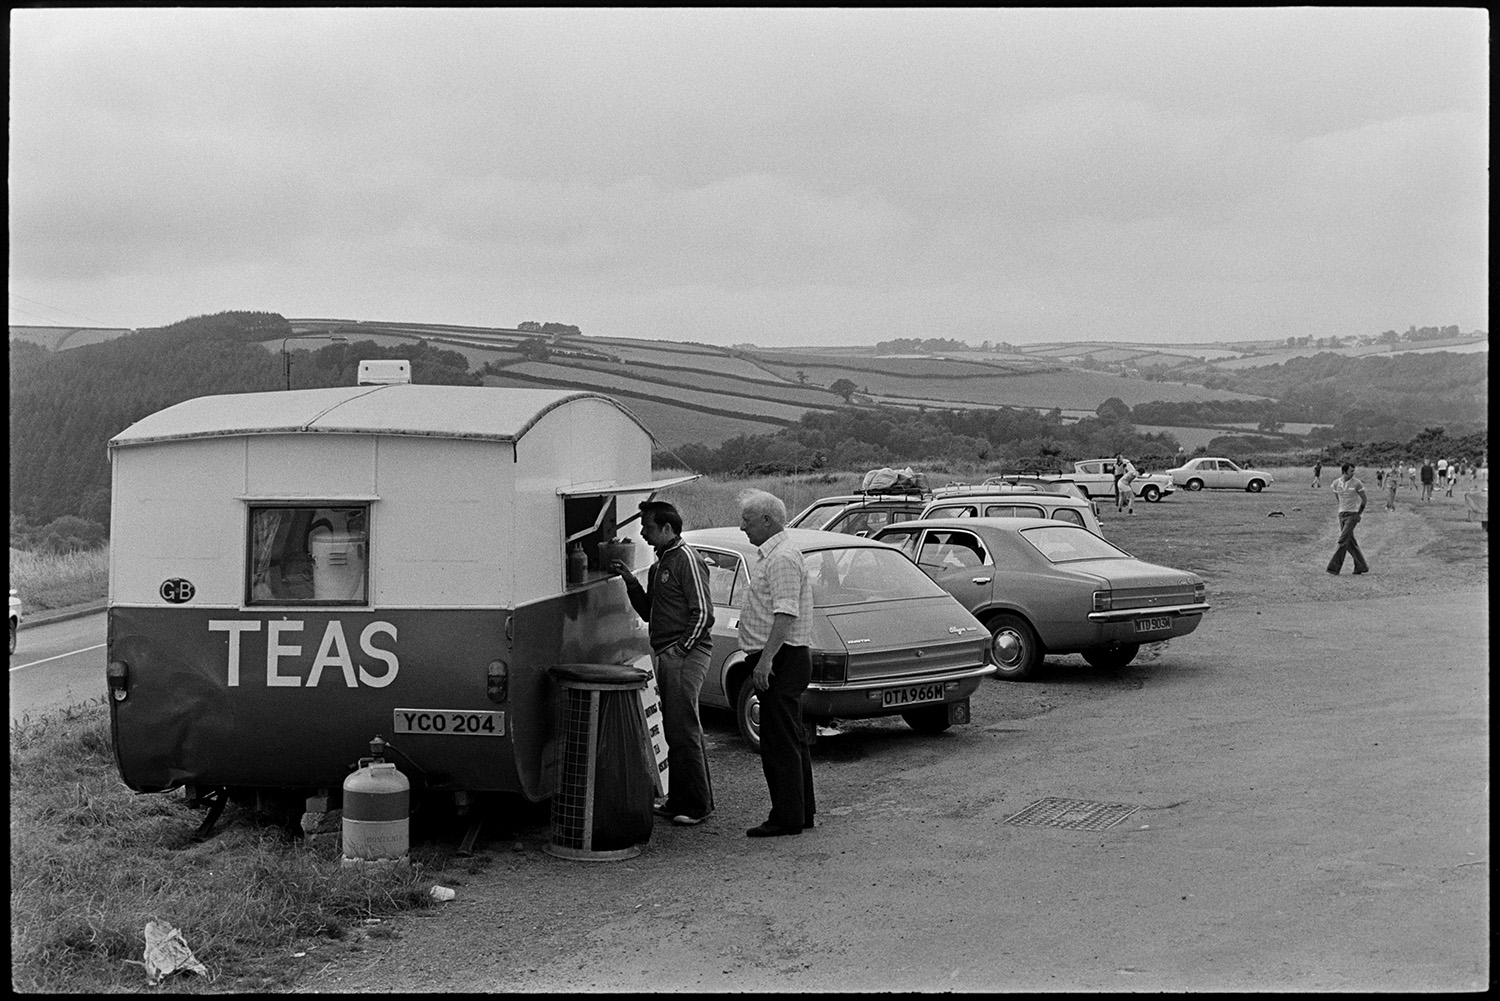 Mobile snack bar, caravan with customers in car park. 
[Two men queueing to get drinks and food from a mobile snack van , e from a converted caravan, in a car park at Torrington. Parked cars can be seen in the background and the word 'Teas' is written on the side of the snack van.]